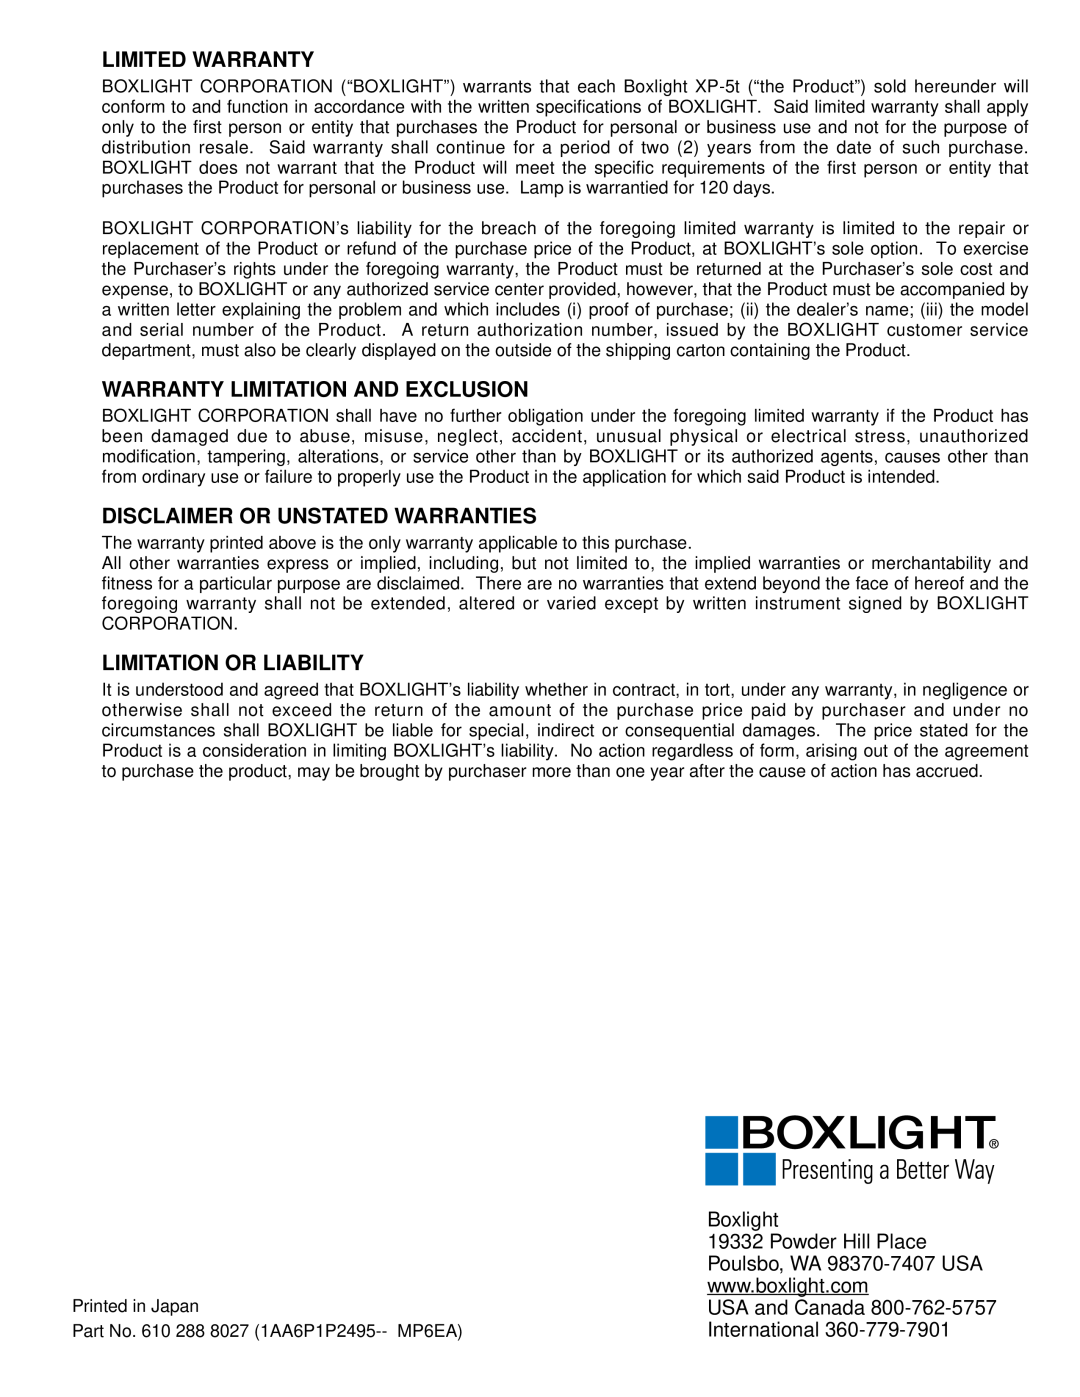 BOXLIGHT XP-5t manual Limited Warranty, Warranty Limitation And Exclusion, Disclaimer Or Unstated Warranties, Boxlight 